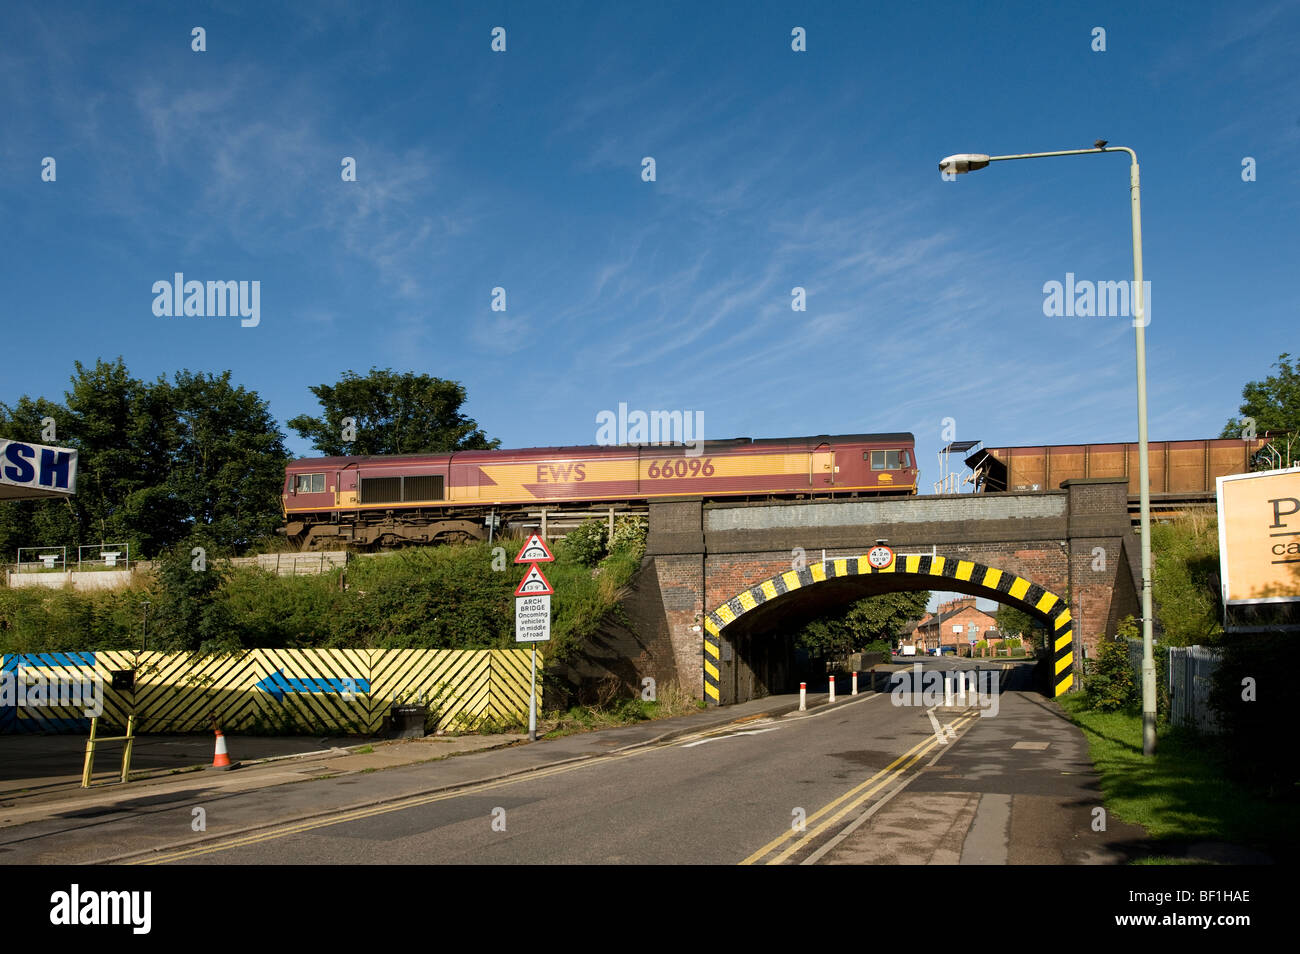 Freight train travelling over a railway bridge crossing a road in the Midlands, England Stock Photo